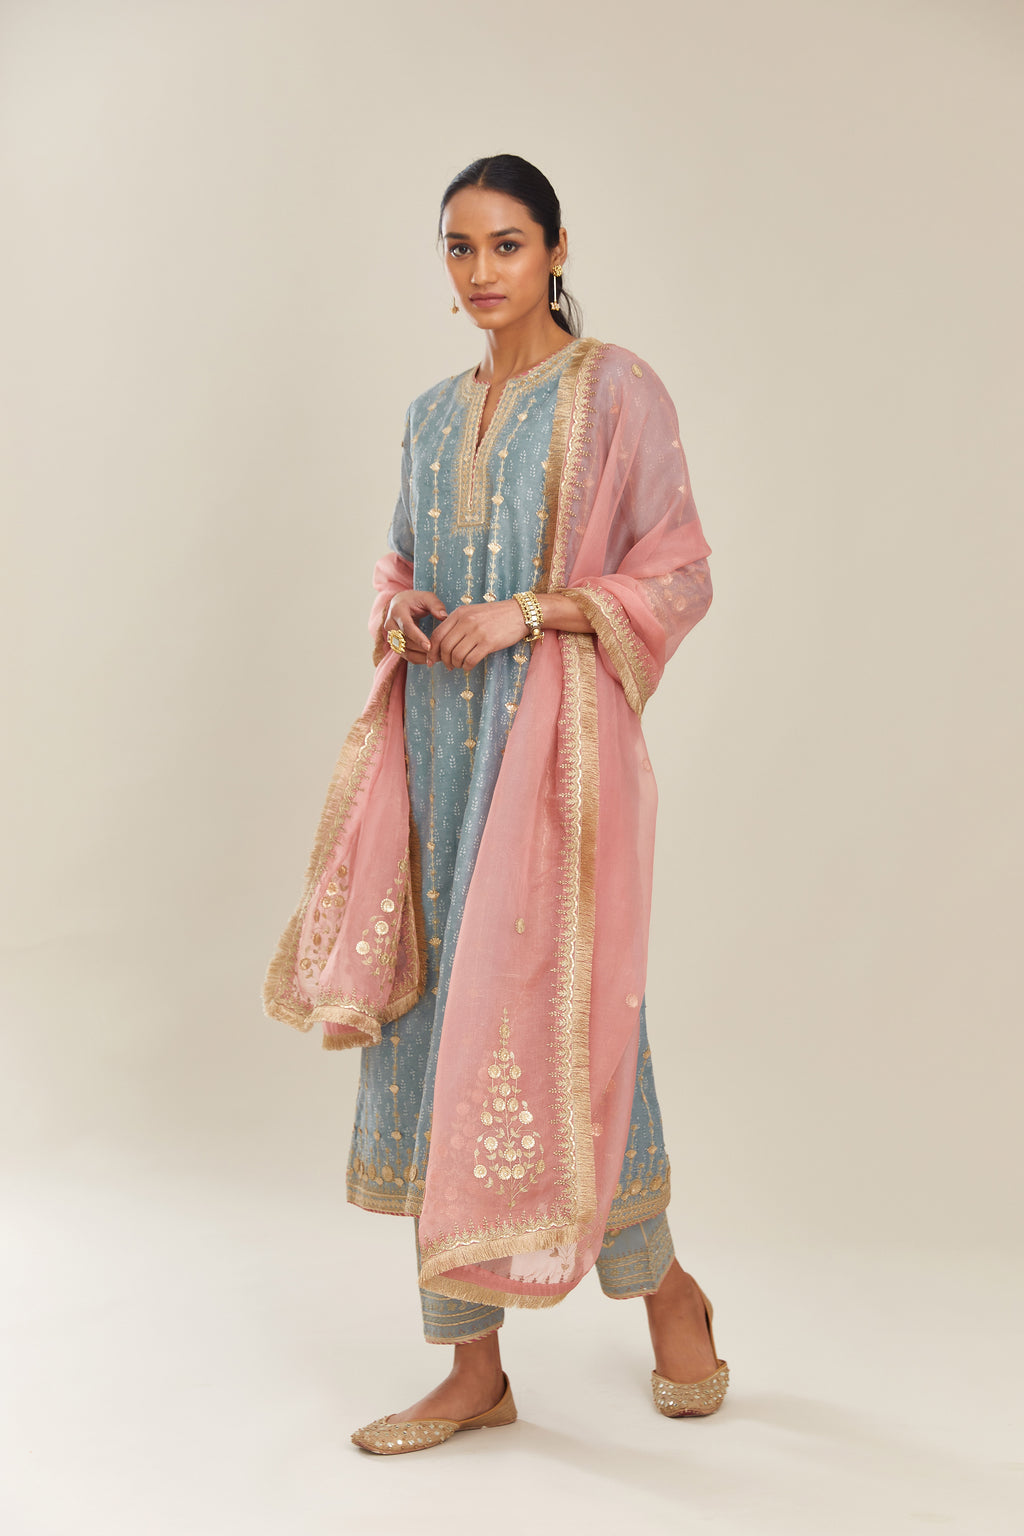 Pink silk organza dupatta with delicate gold zari and gota embroidery border running along all edges.